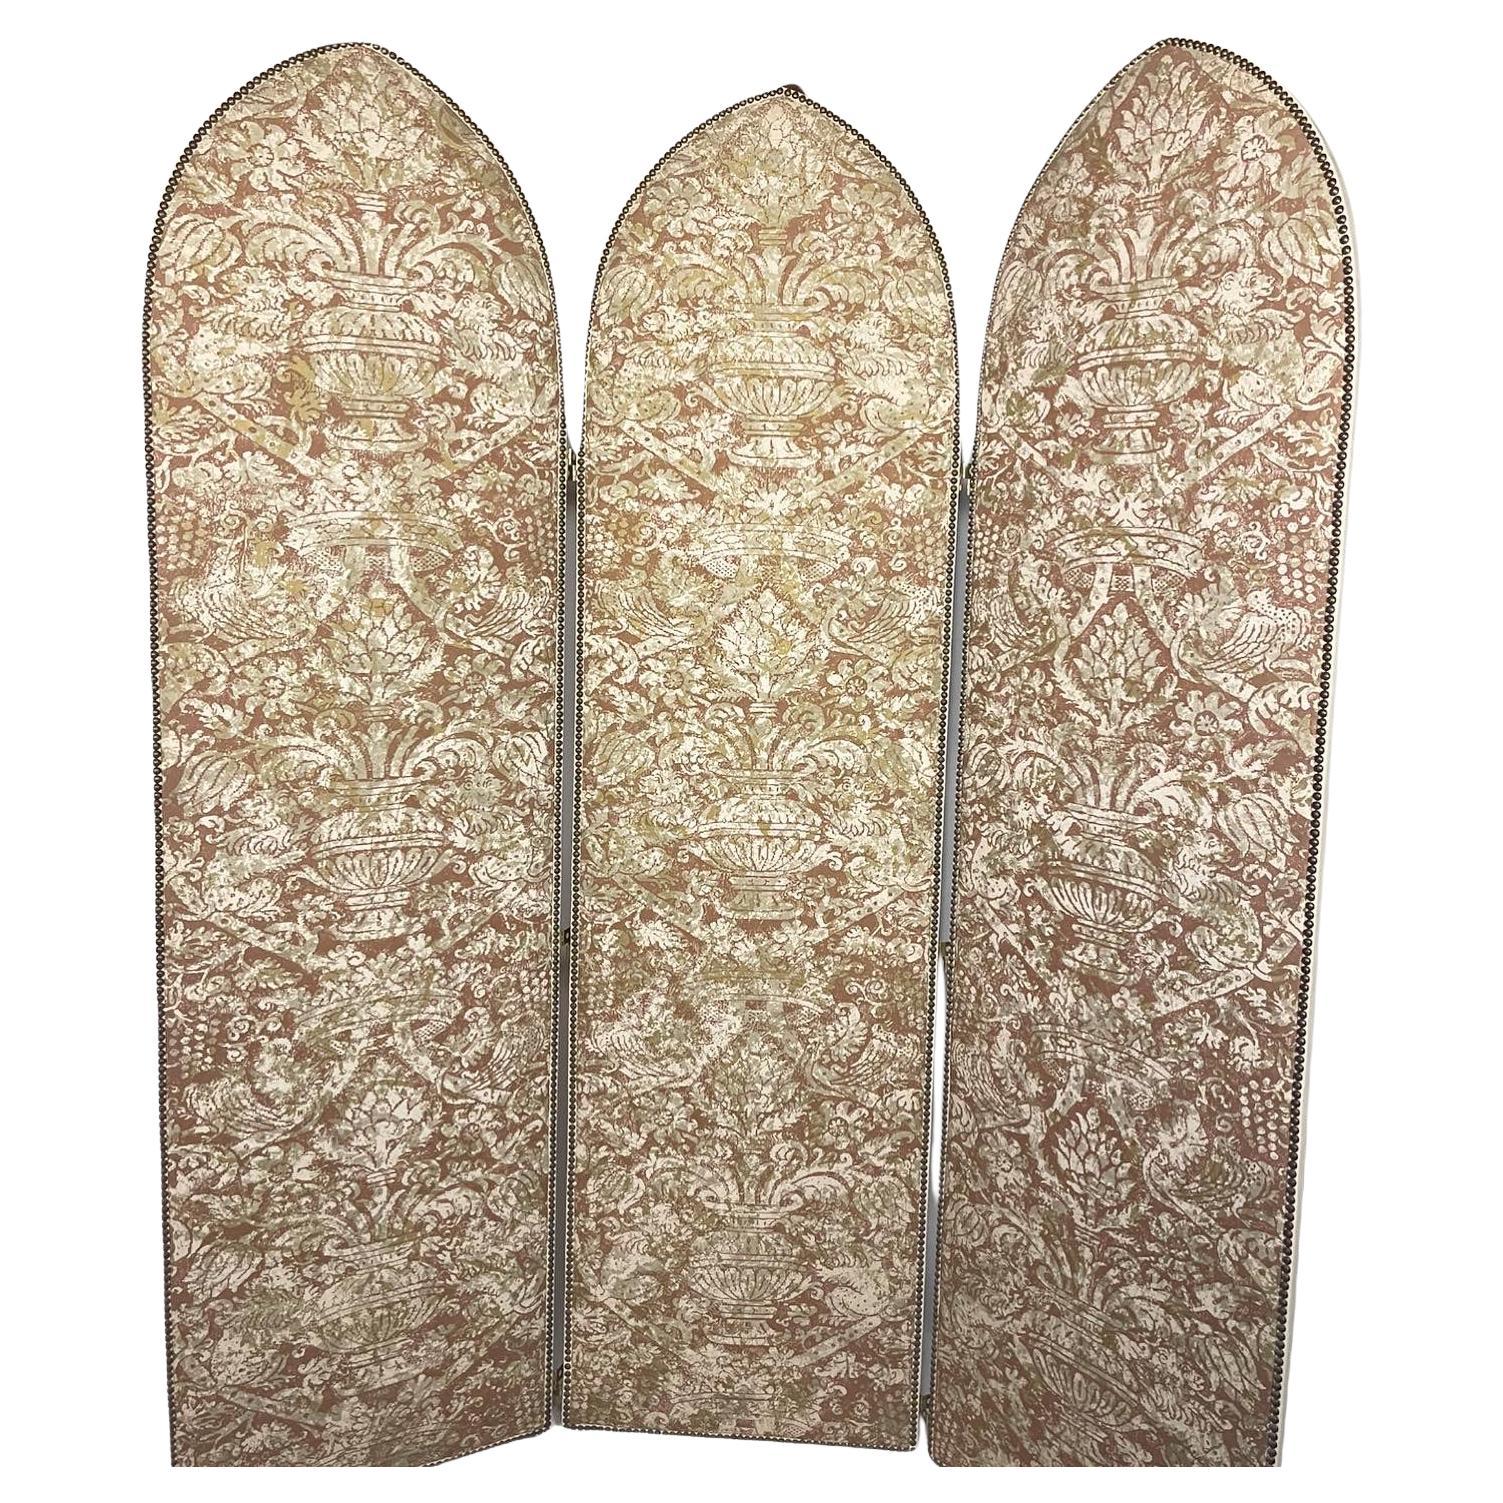 Beautiful Fortuny damask and leather folding screen in beige and gold with white leather and nailhead trim from the estate of William Goldman (1931-2018) British, novelist, playwright, and poet. The 3 paneled folding screen measures 85 inches high